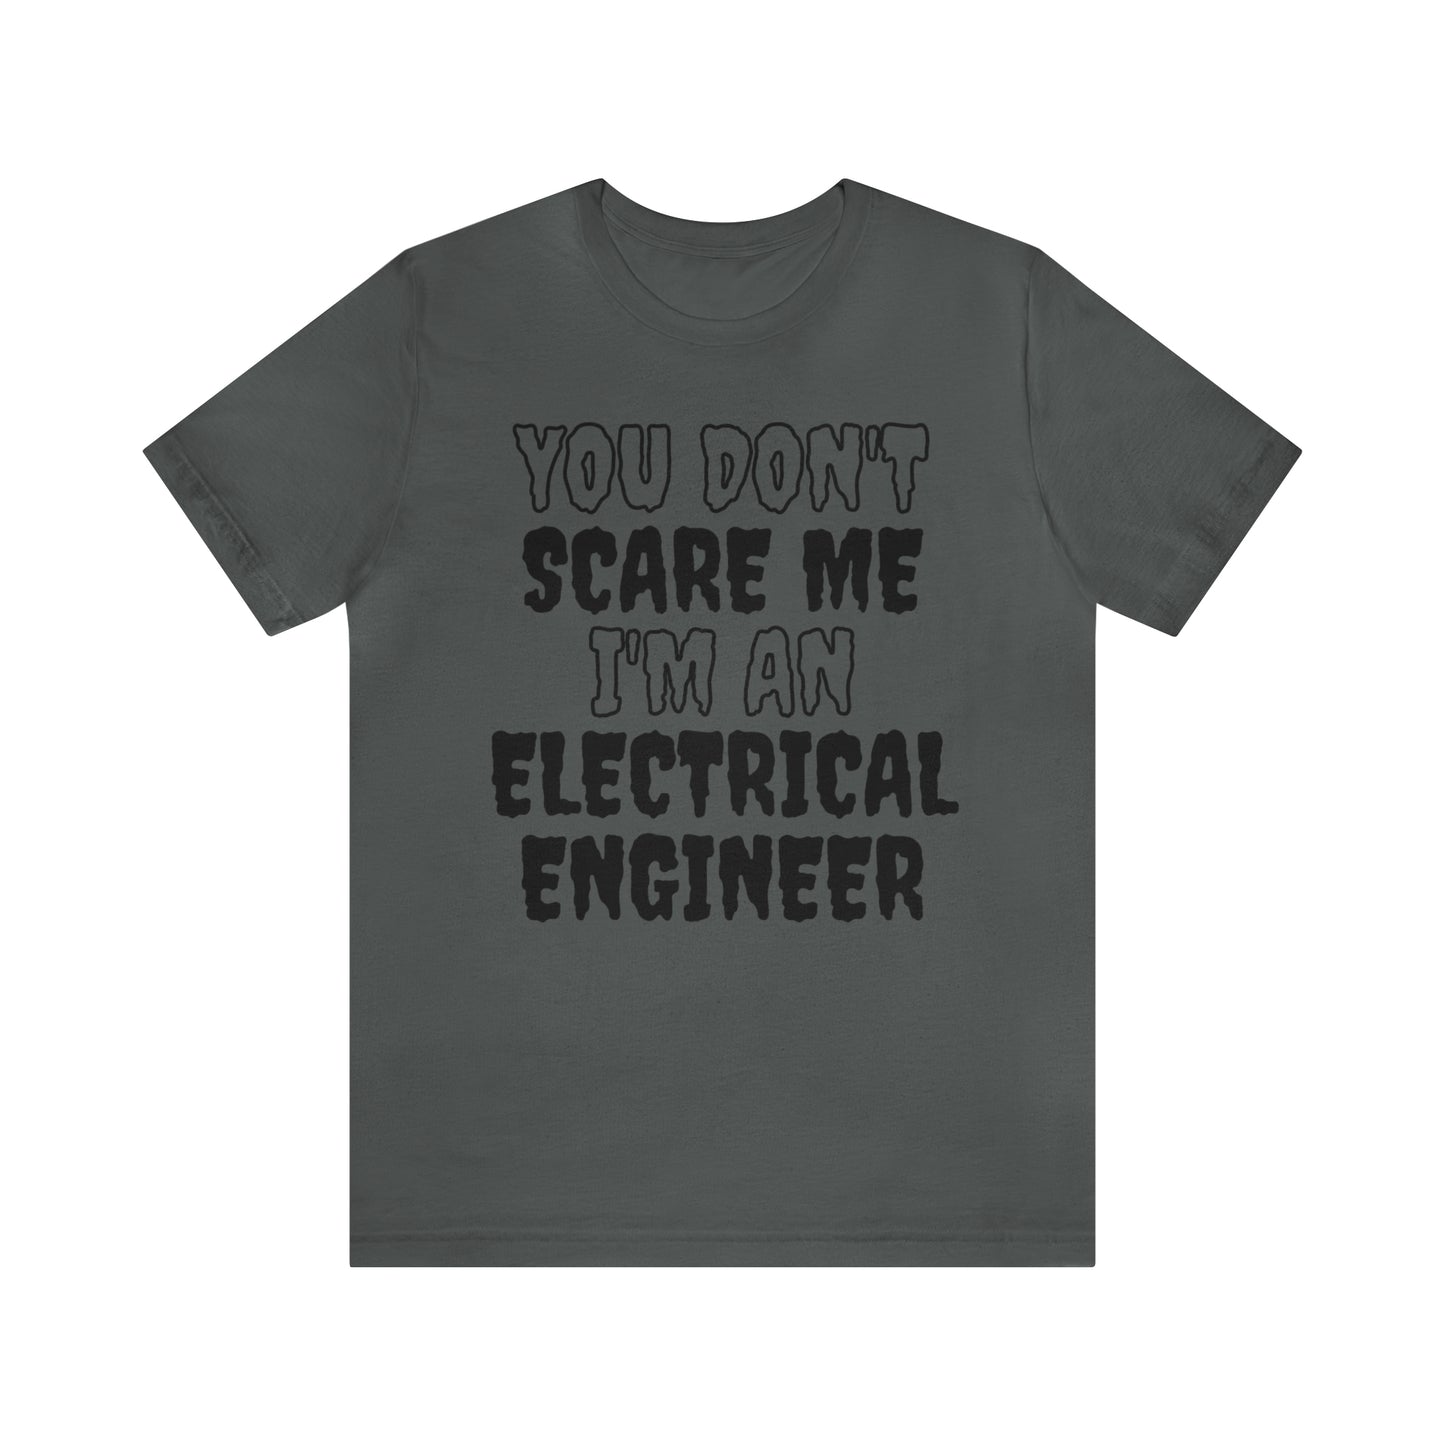 You Don't Scare Me Funny Electrical Engineer Shirt Halloween Unisex Short Sleeve Tee Shirt